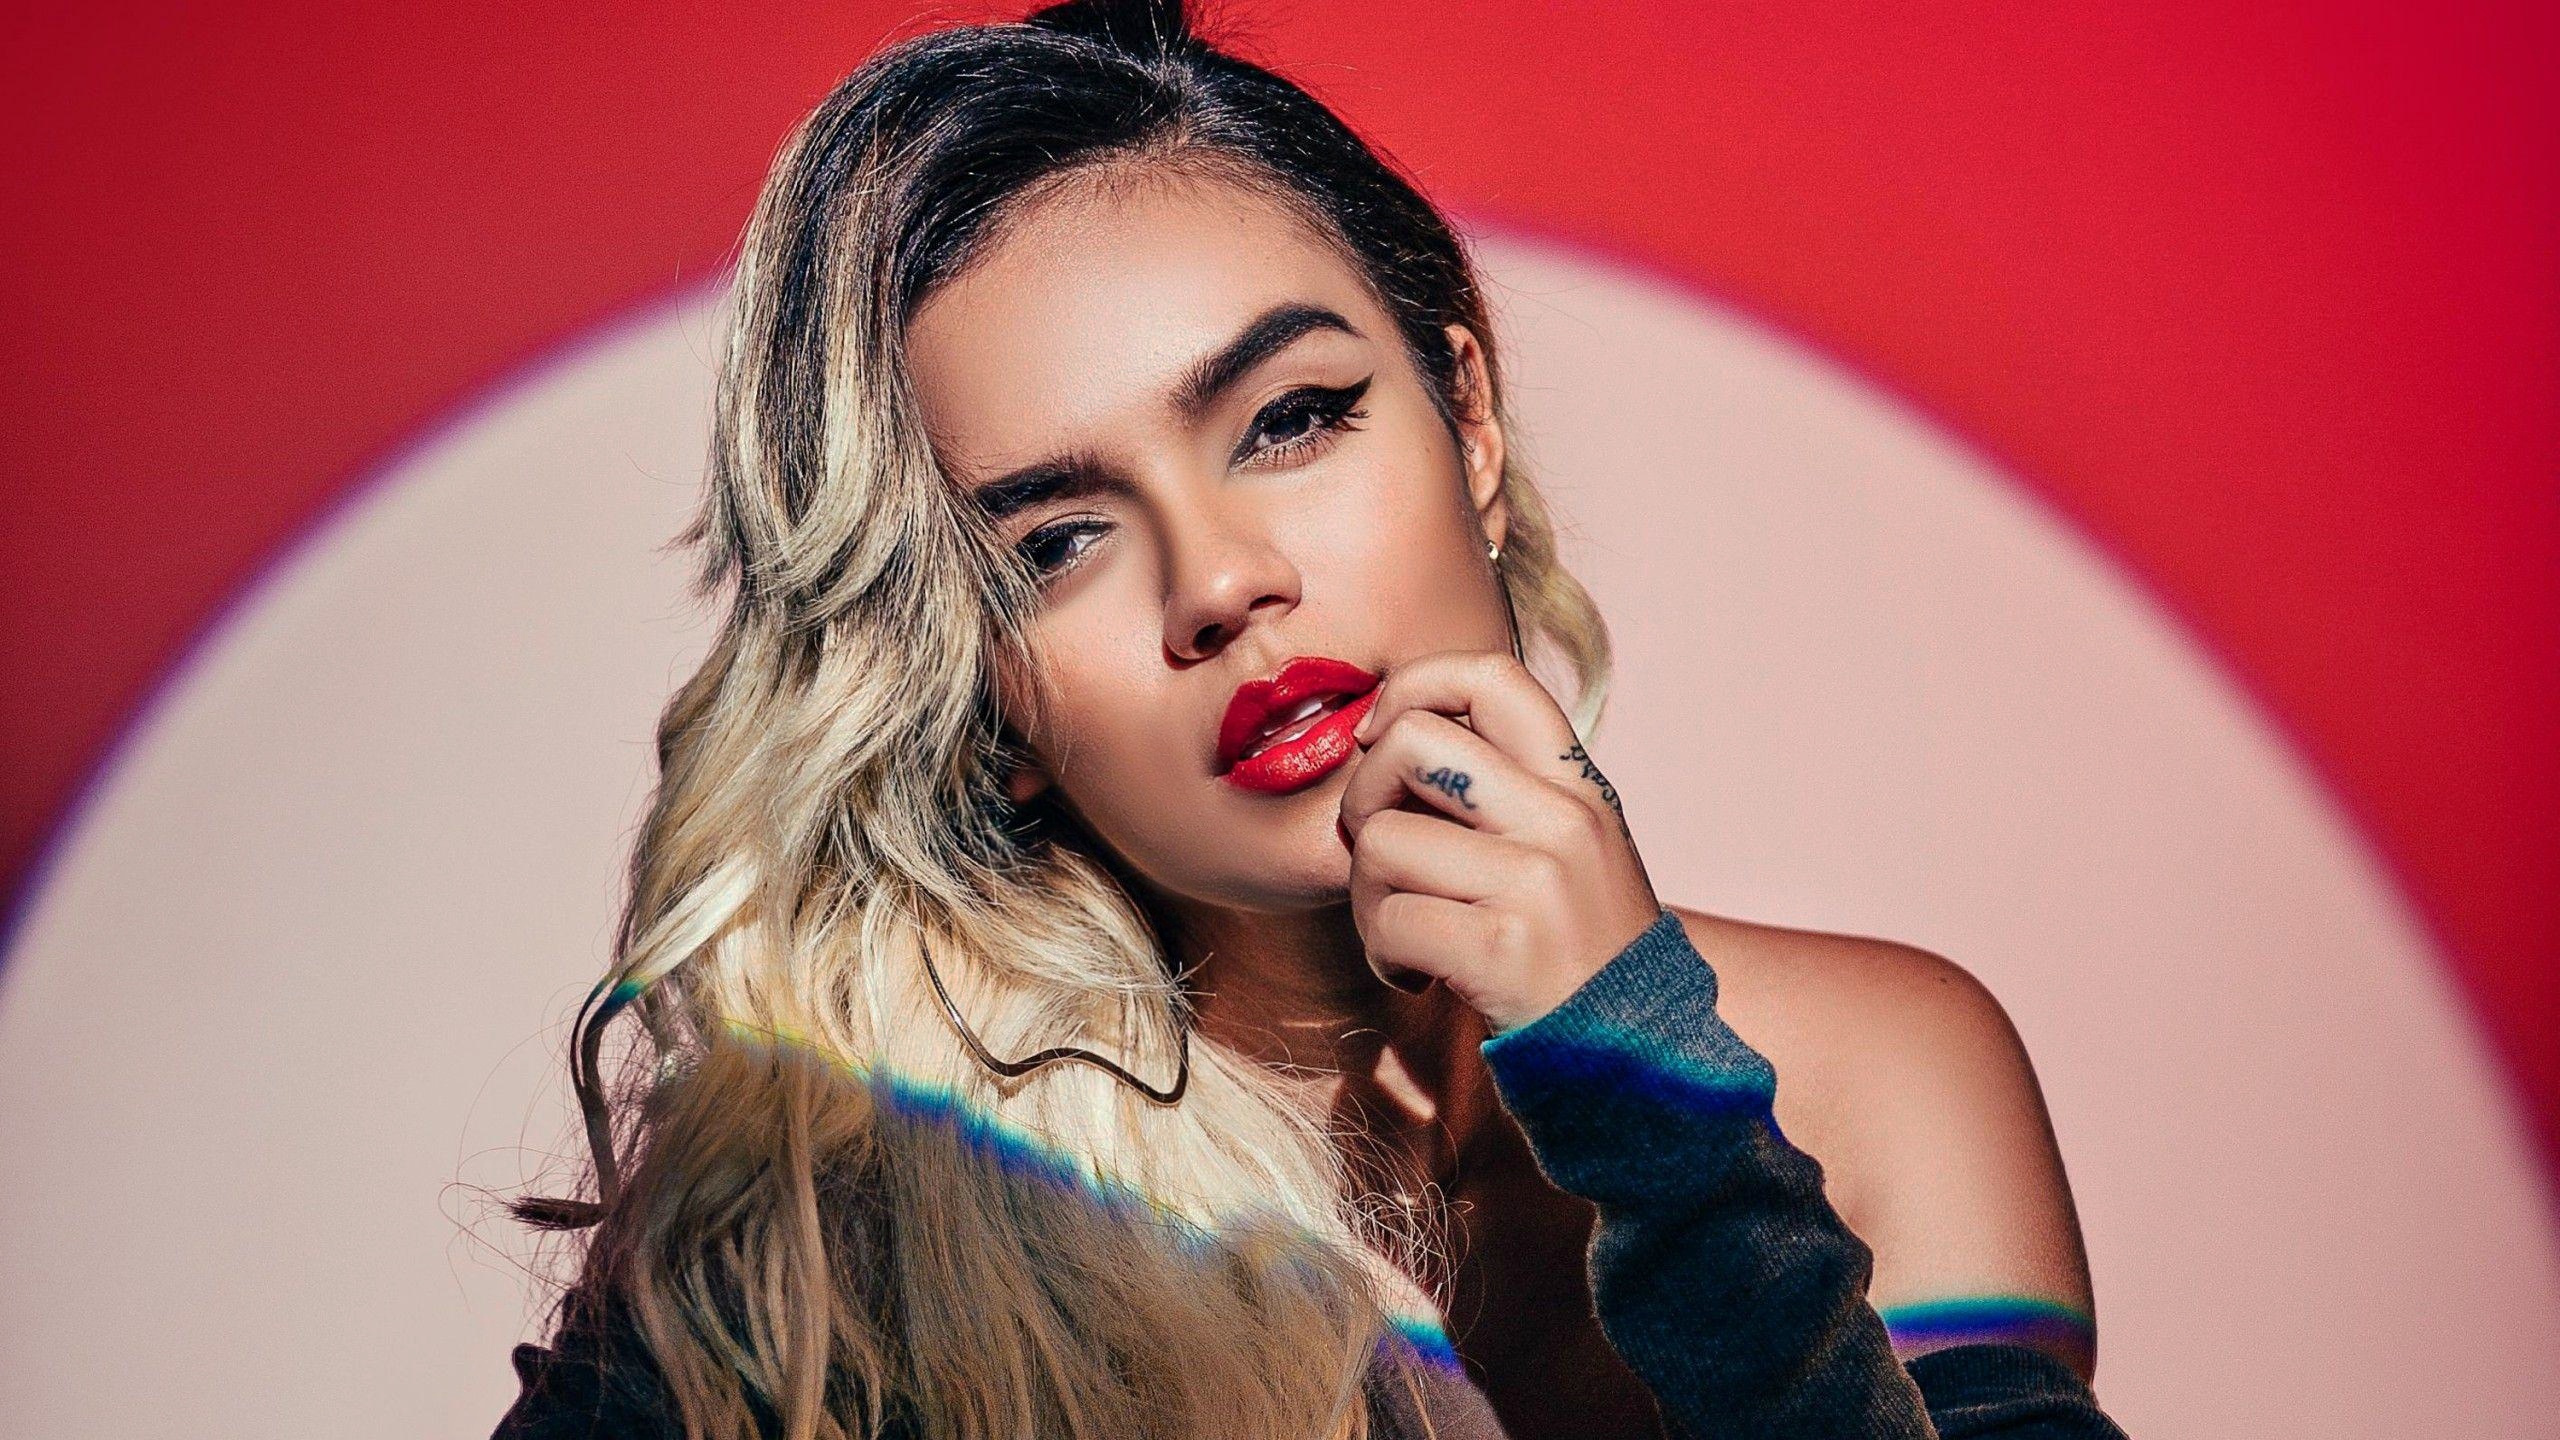 Reggaeton Music: Karol G, An urban form of music that has its roots in Latin and Caribbean music. 2560x1440 HD Wallpaper.